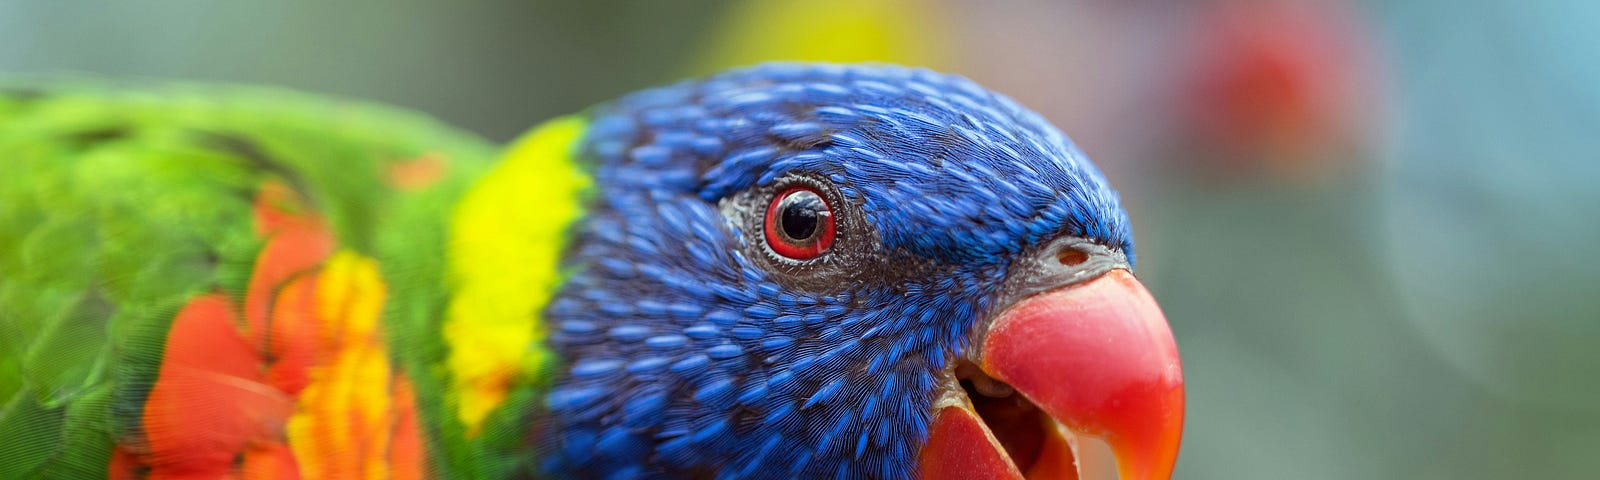 parrot with green, blue, yellow, and orange feathers, and with a red and yellow beak